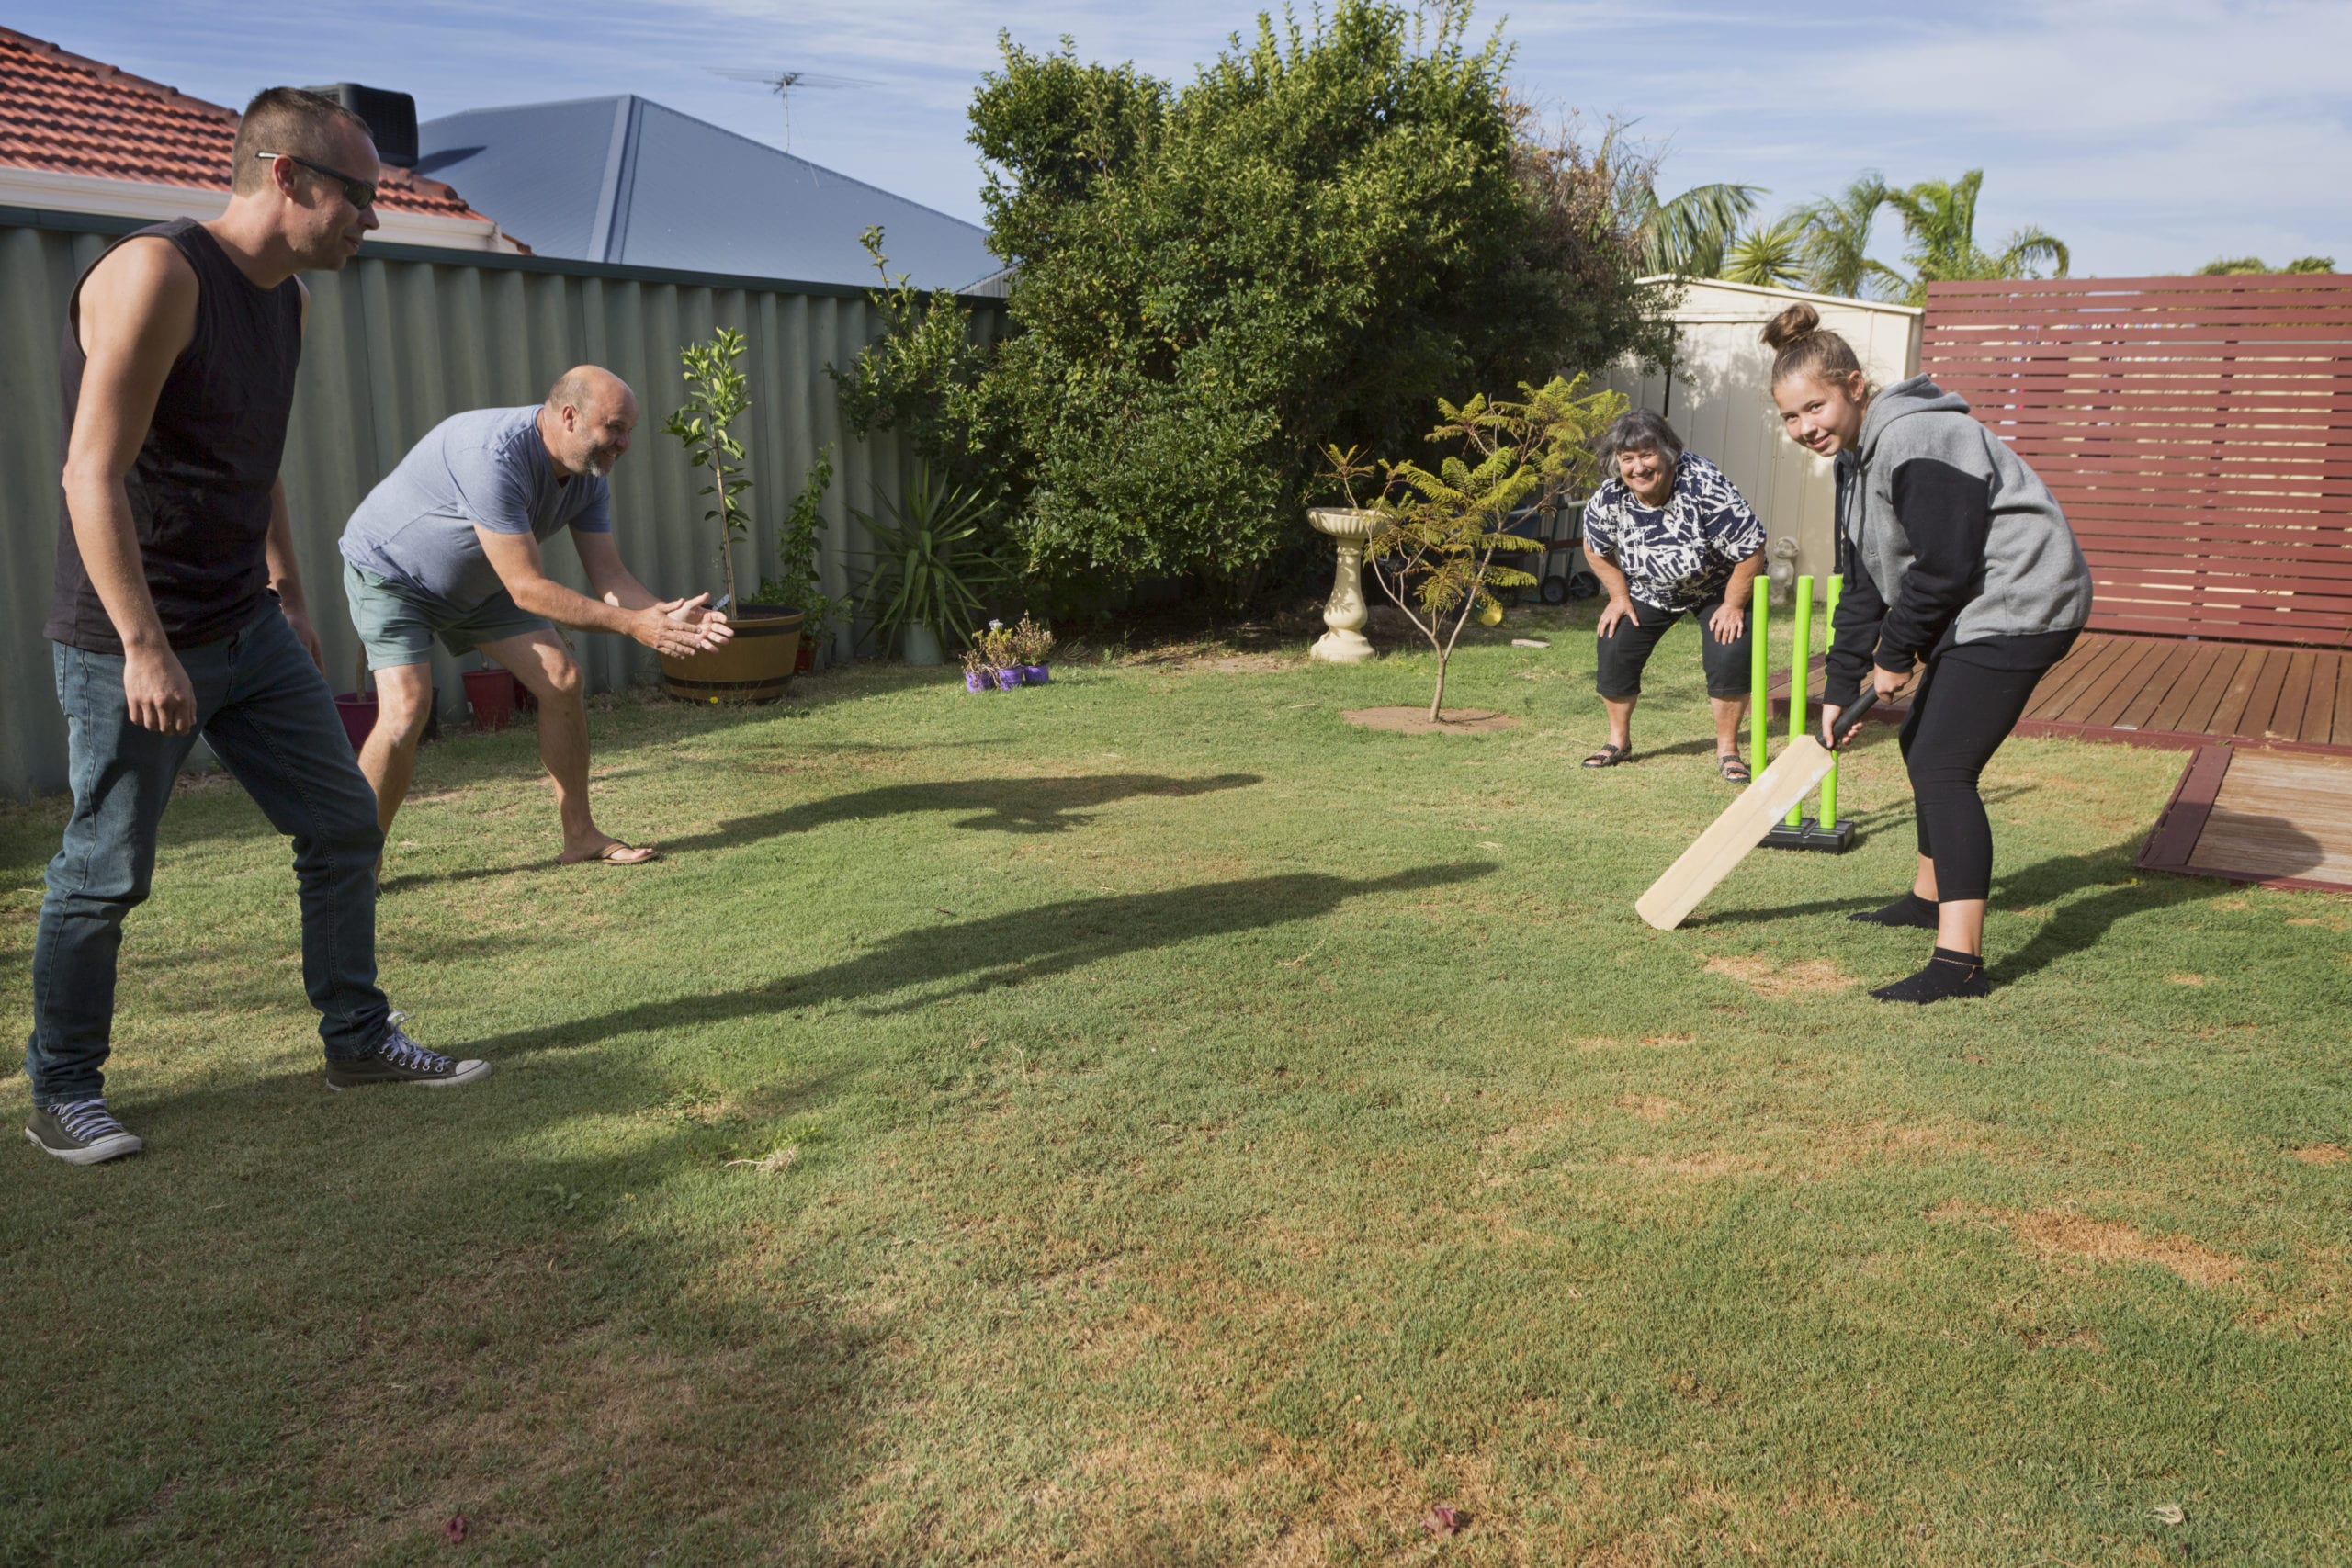 A family playing a traditional game of Back Yard Cricket.